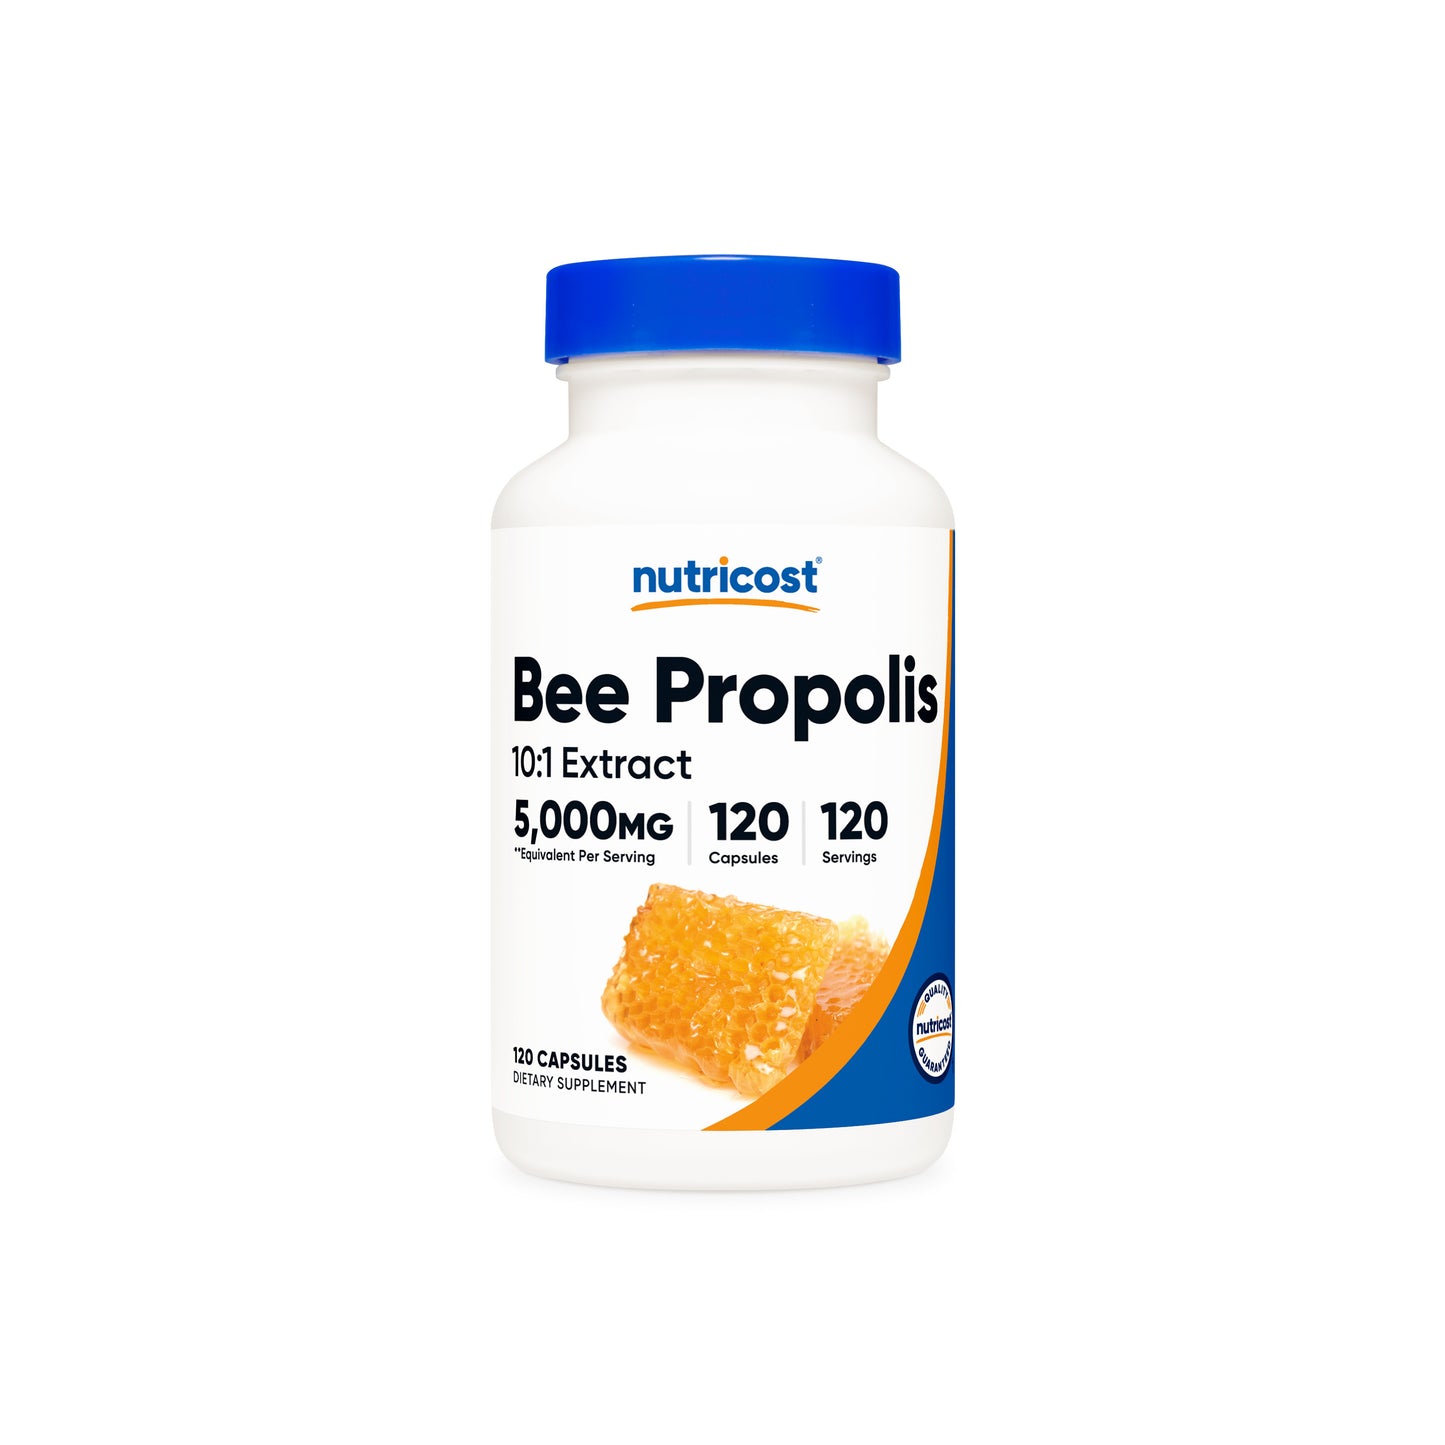 Nutricost Bee Propolis 10:1 Capsules